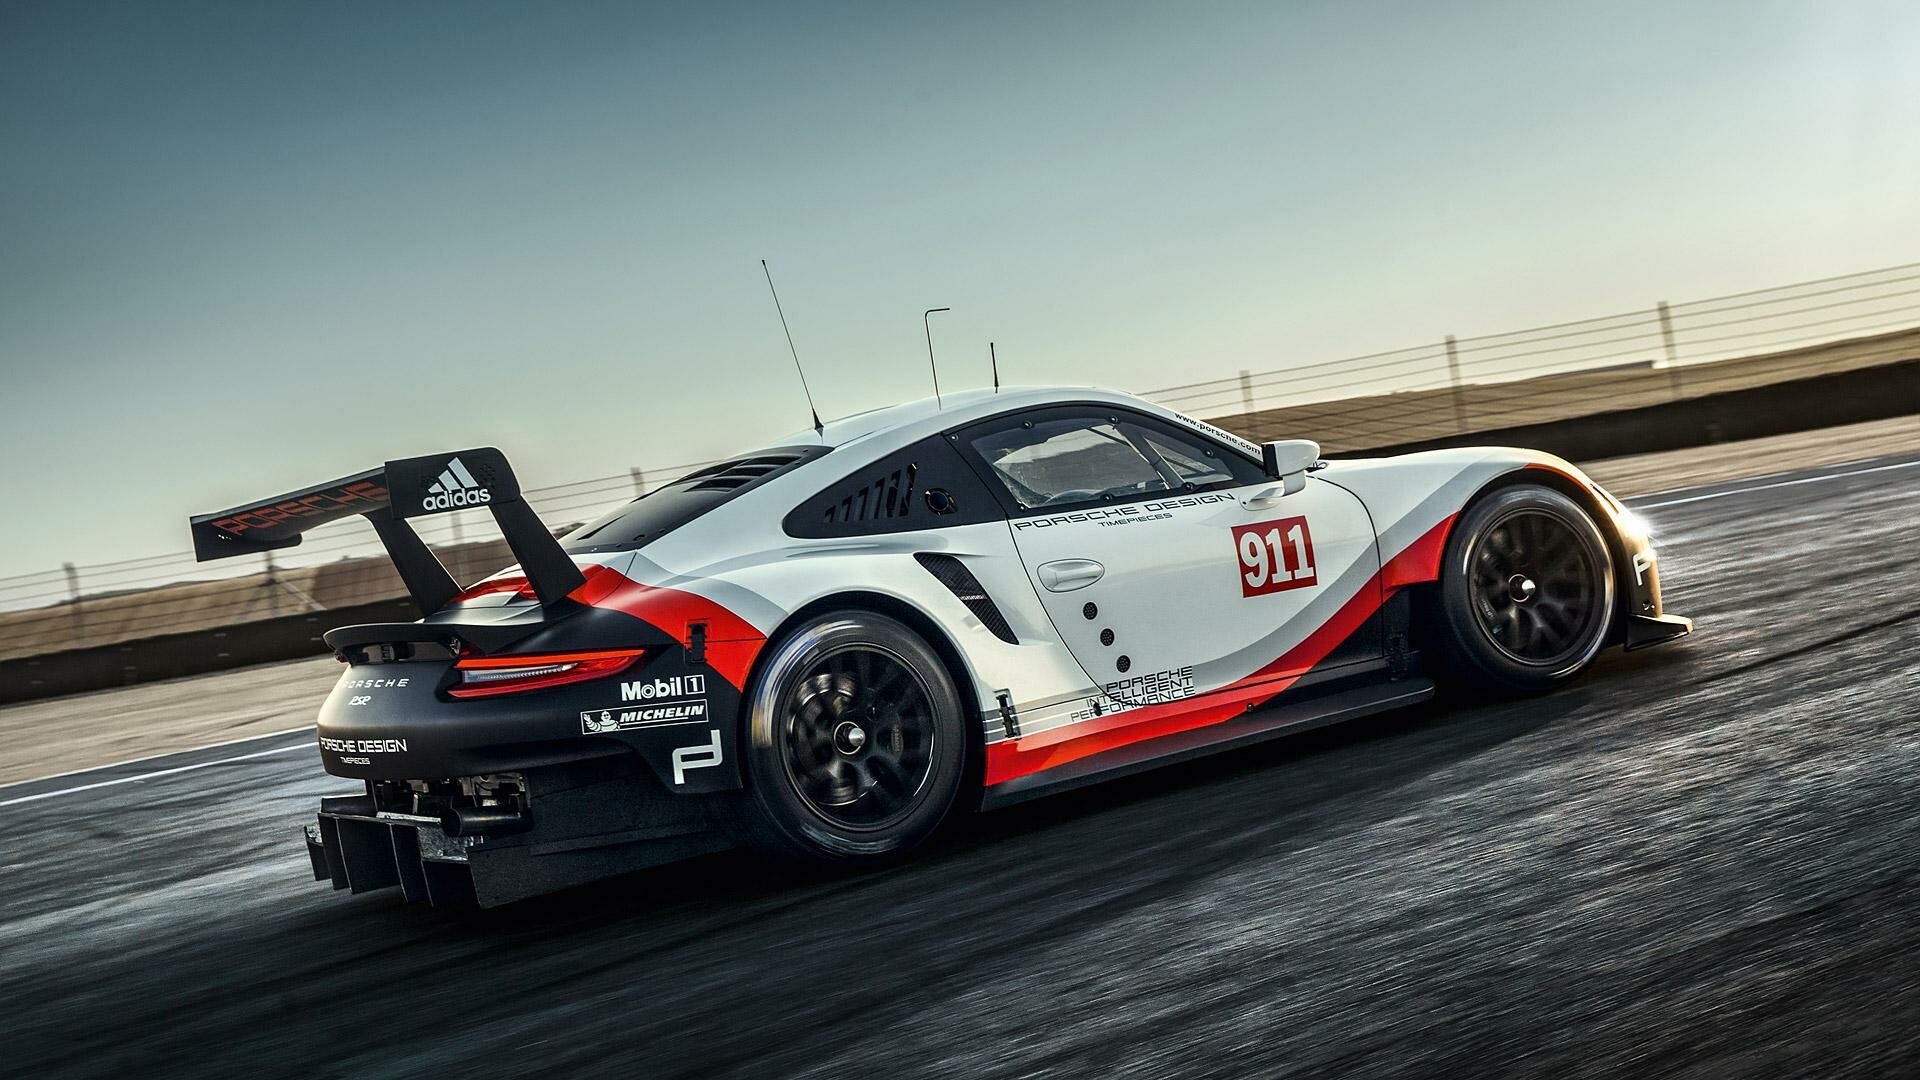 Porsche: RSR, While retaining the typical 911 design, this is the biggest evolution by now in the history of the top GT model. 1920x1080 Full HD Background.